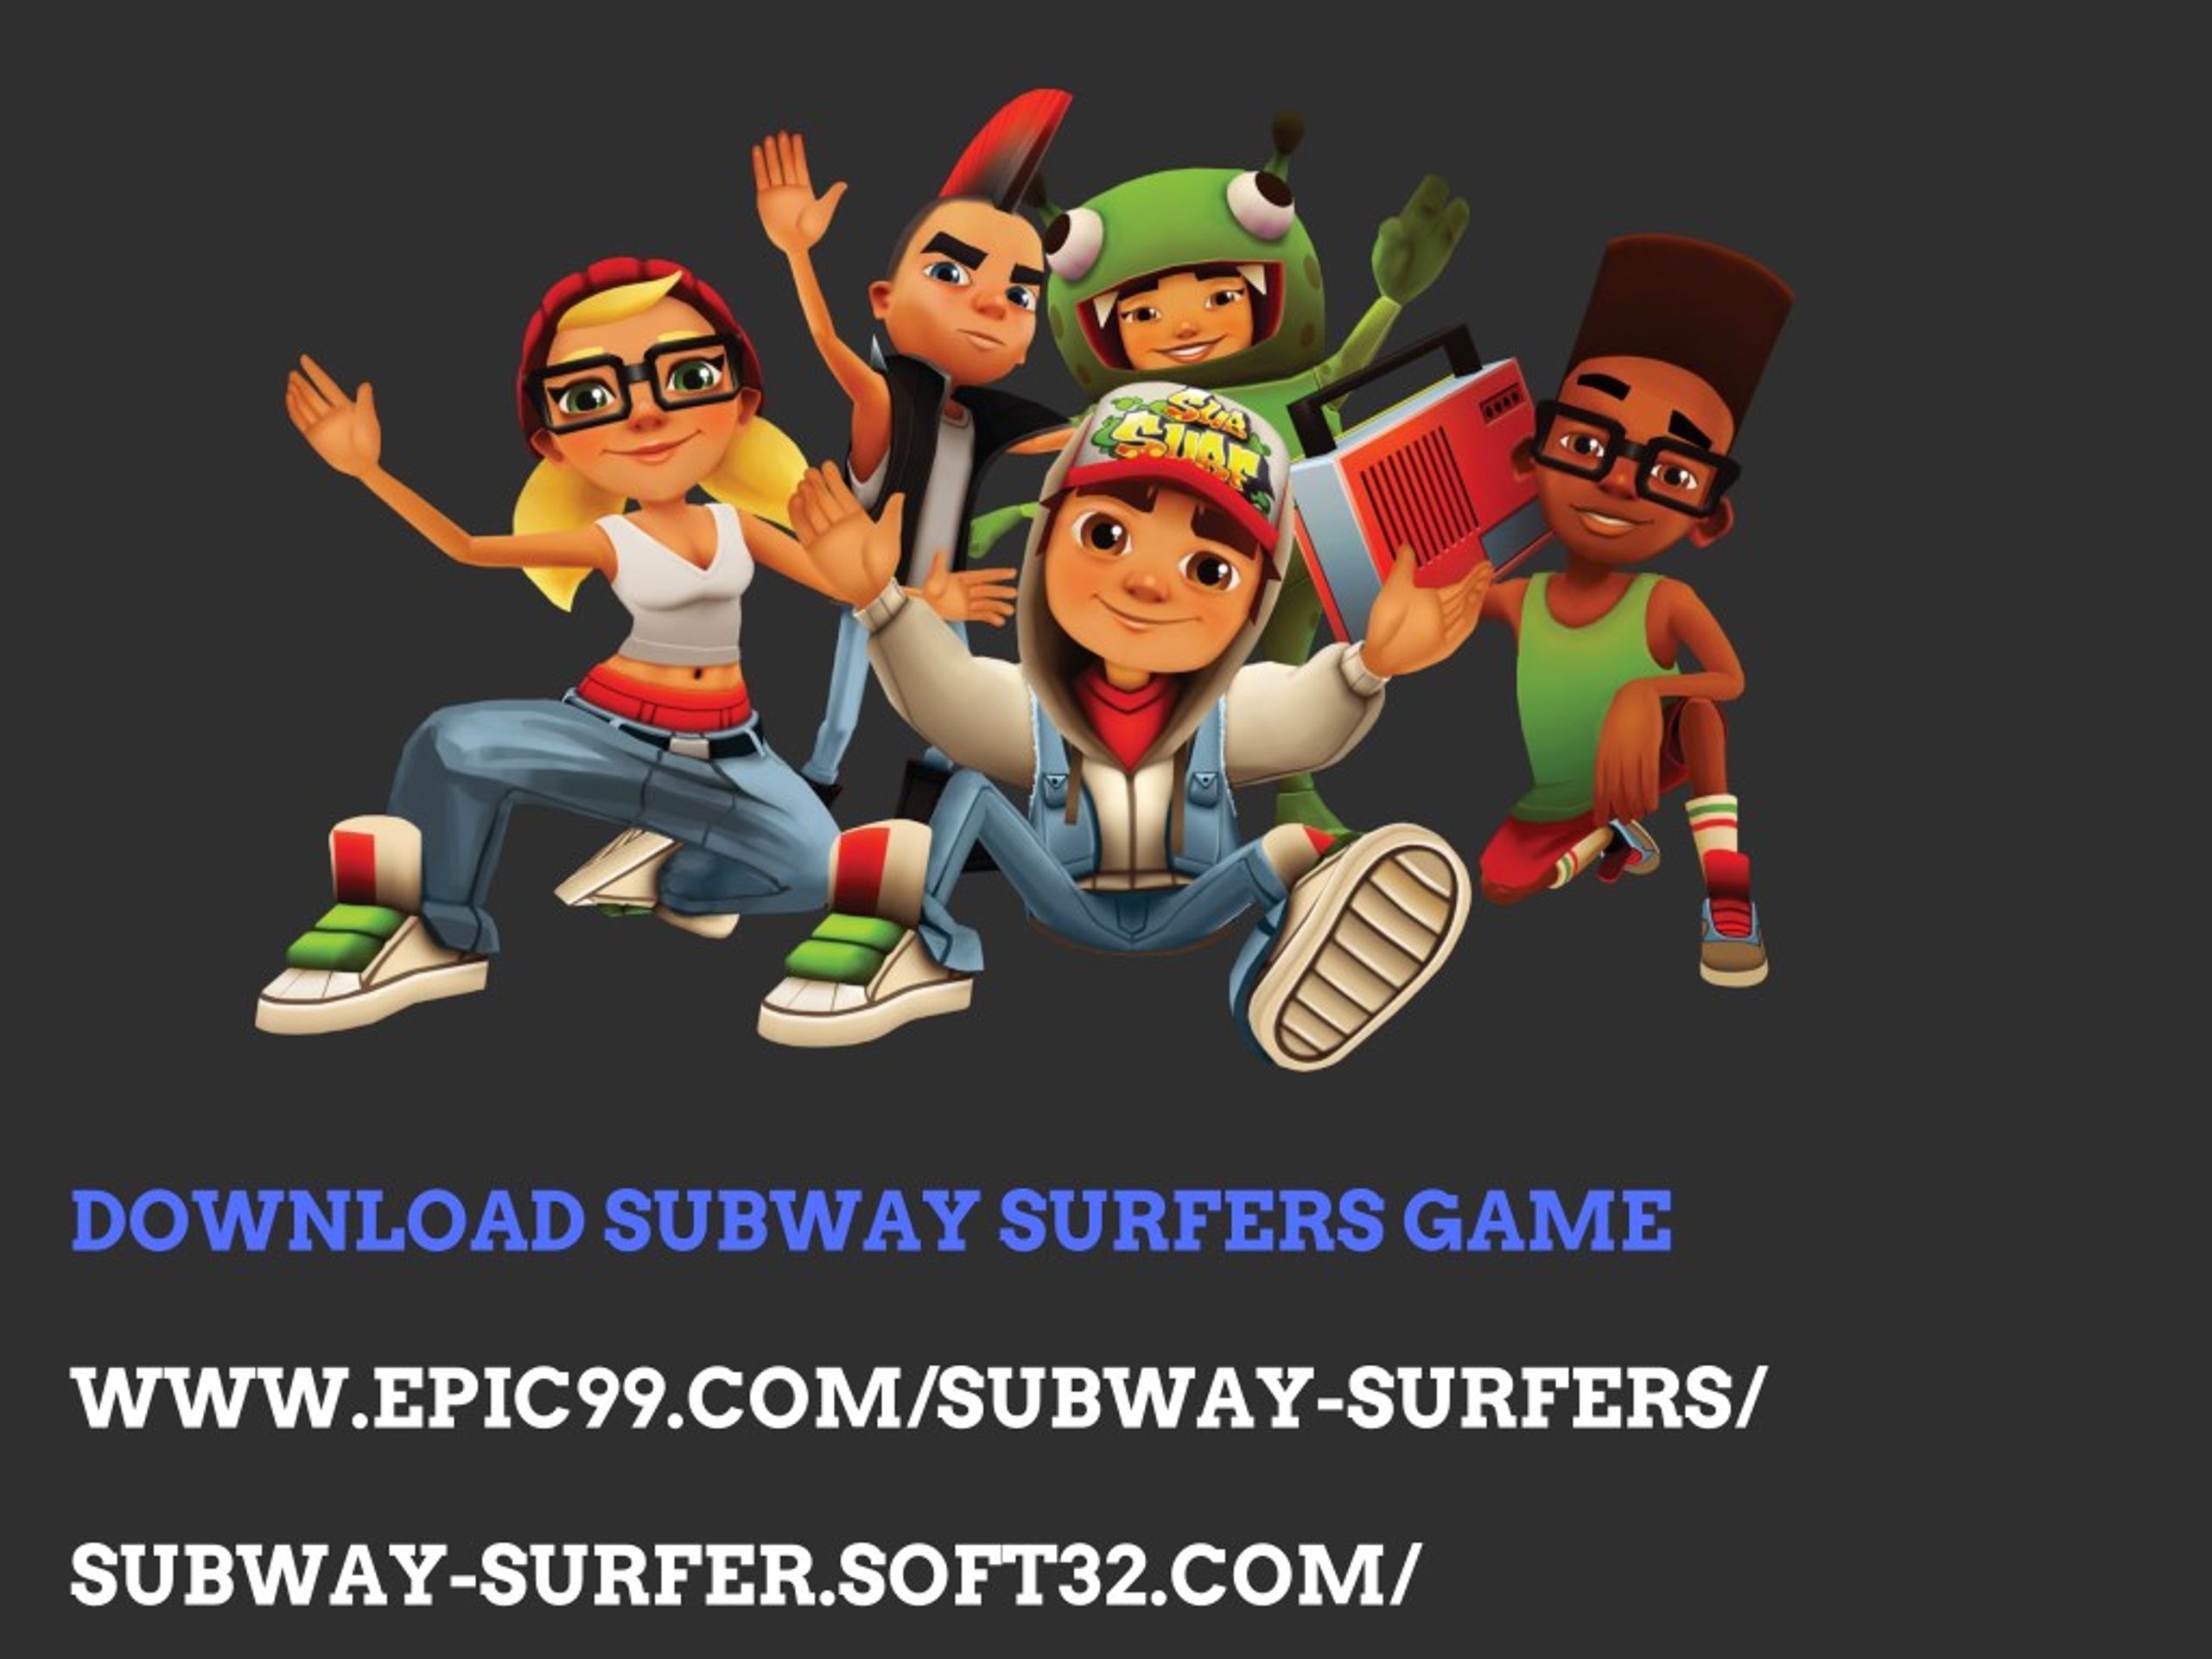 Download subway surfers game by williamsmith - Issuu